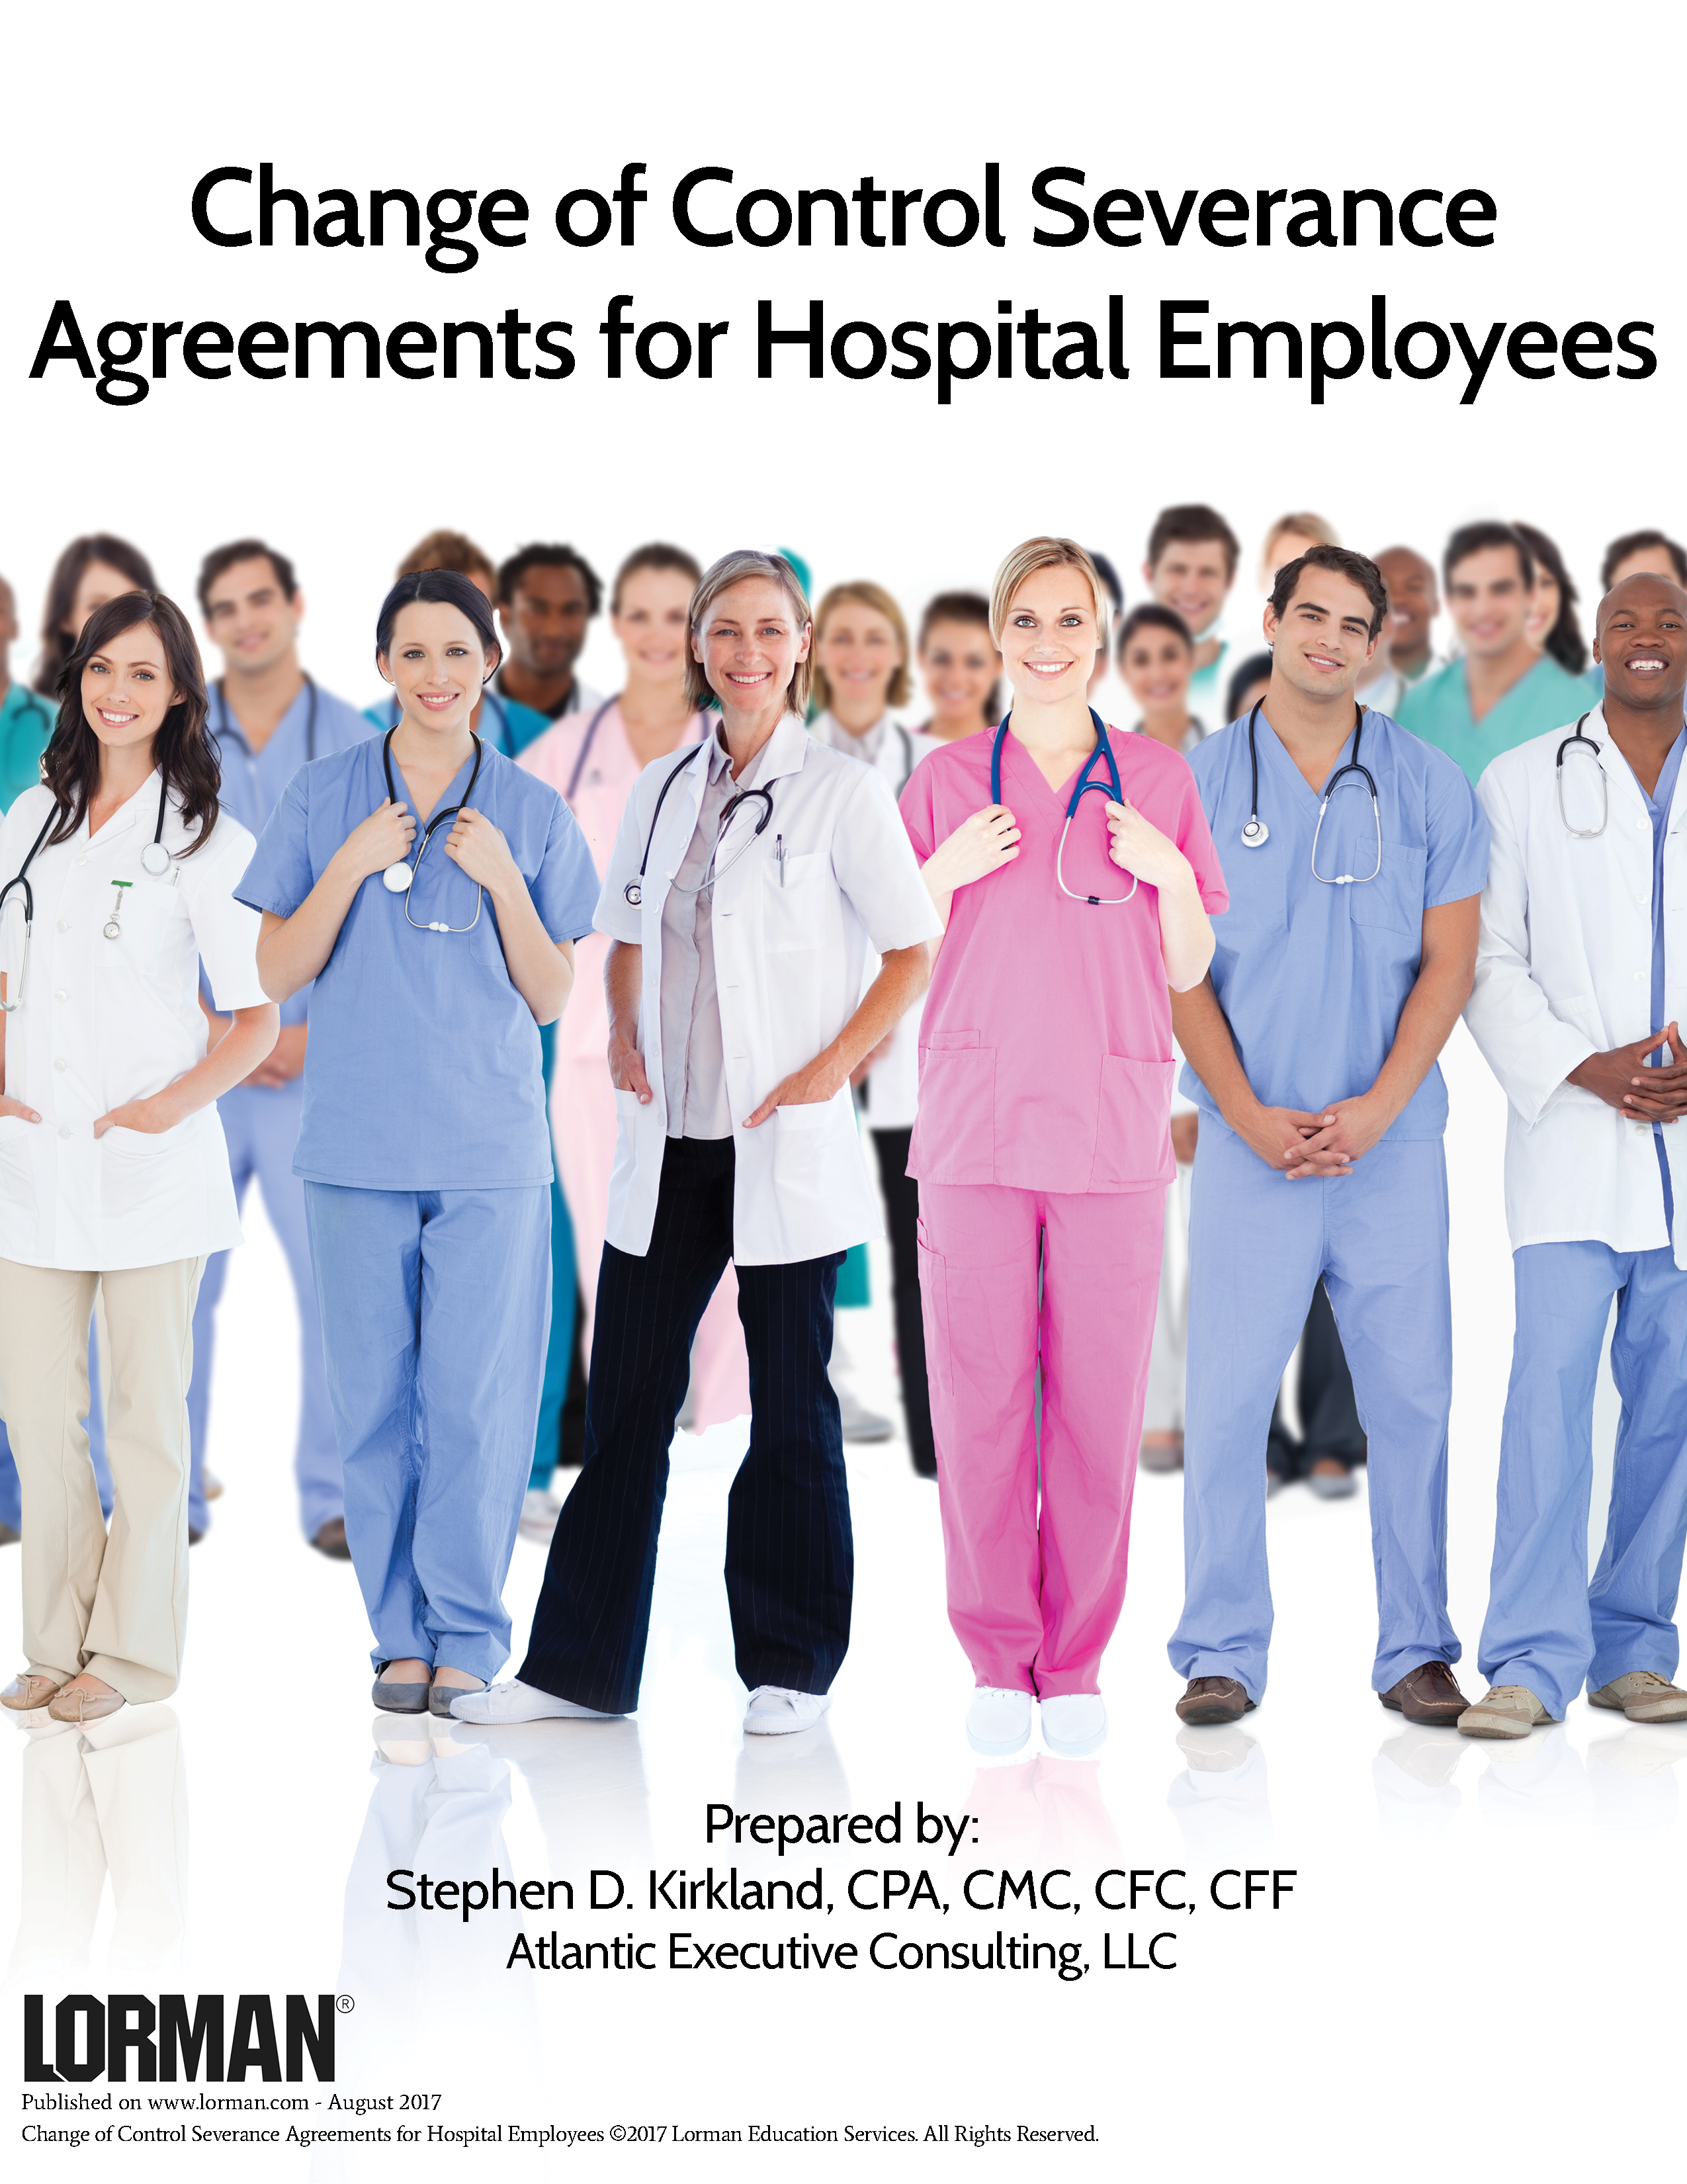 Change of Control Severance Agreements for Hospital Employees